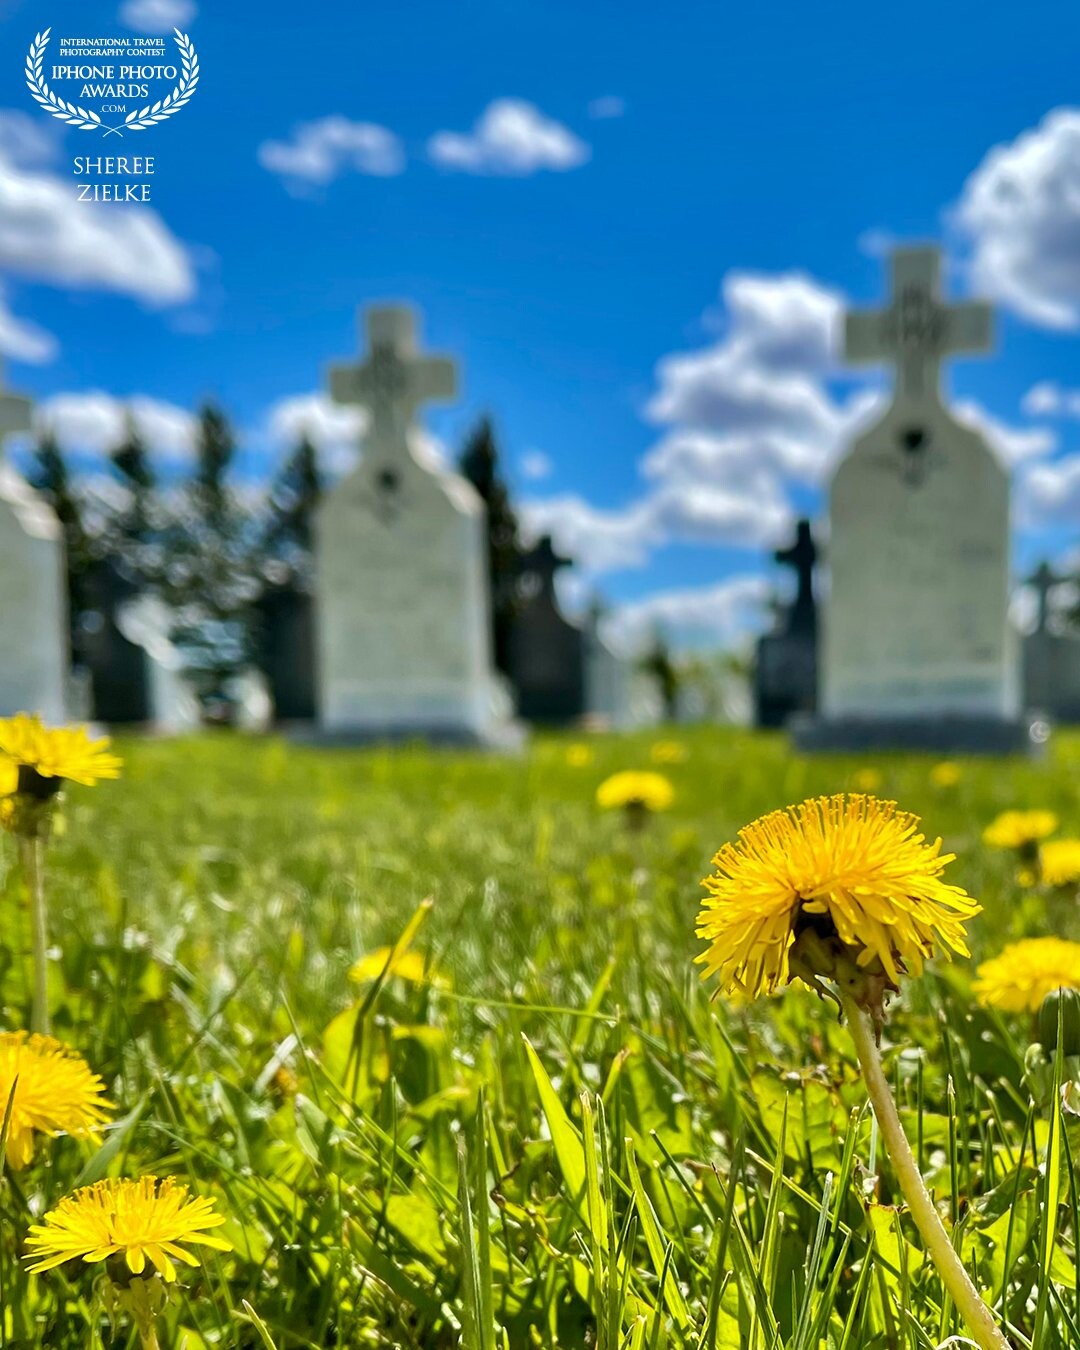 My husband and I love road trips, and coming across graveyards here in our province of Alberta.  We love the textures, the history and the stillness. I also love the “portrait” feature on my iPhone 12Pro Max. This bright dandelion was the perfect foreground subject against the grey of the gravestones. The phone’s camera does a great job with selective DOF.